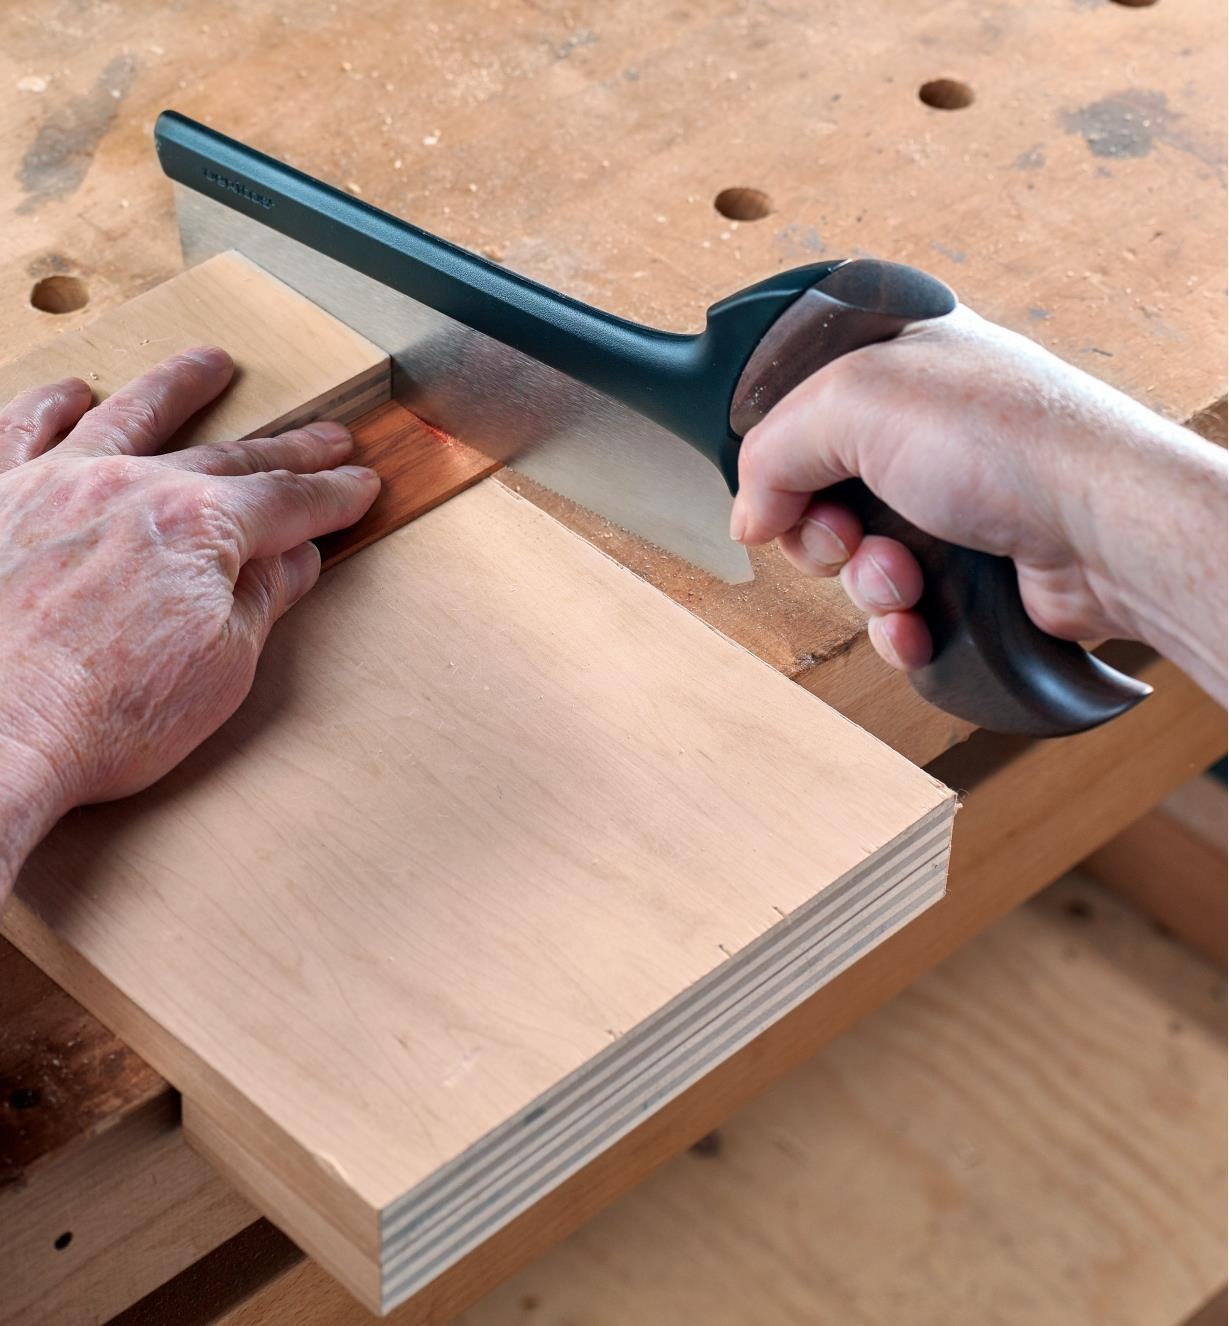 Using the Veritas Small Fine-Tooth Crosscut Saw to cut a thin piece of wood across the grain on a bench hook